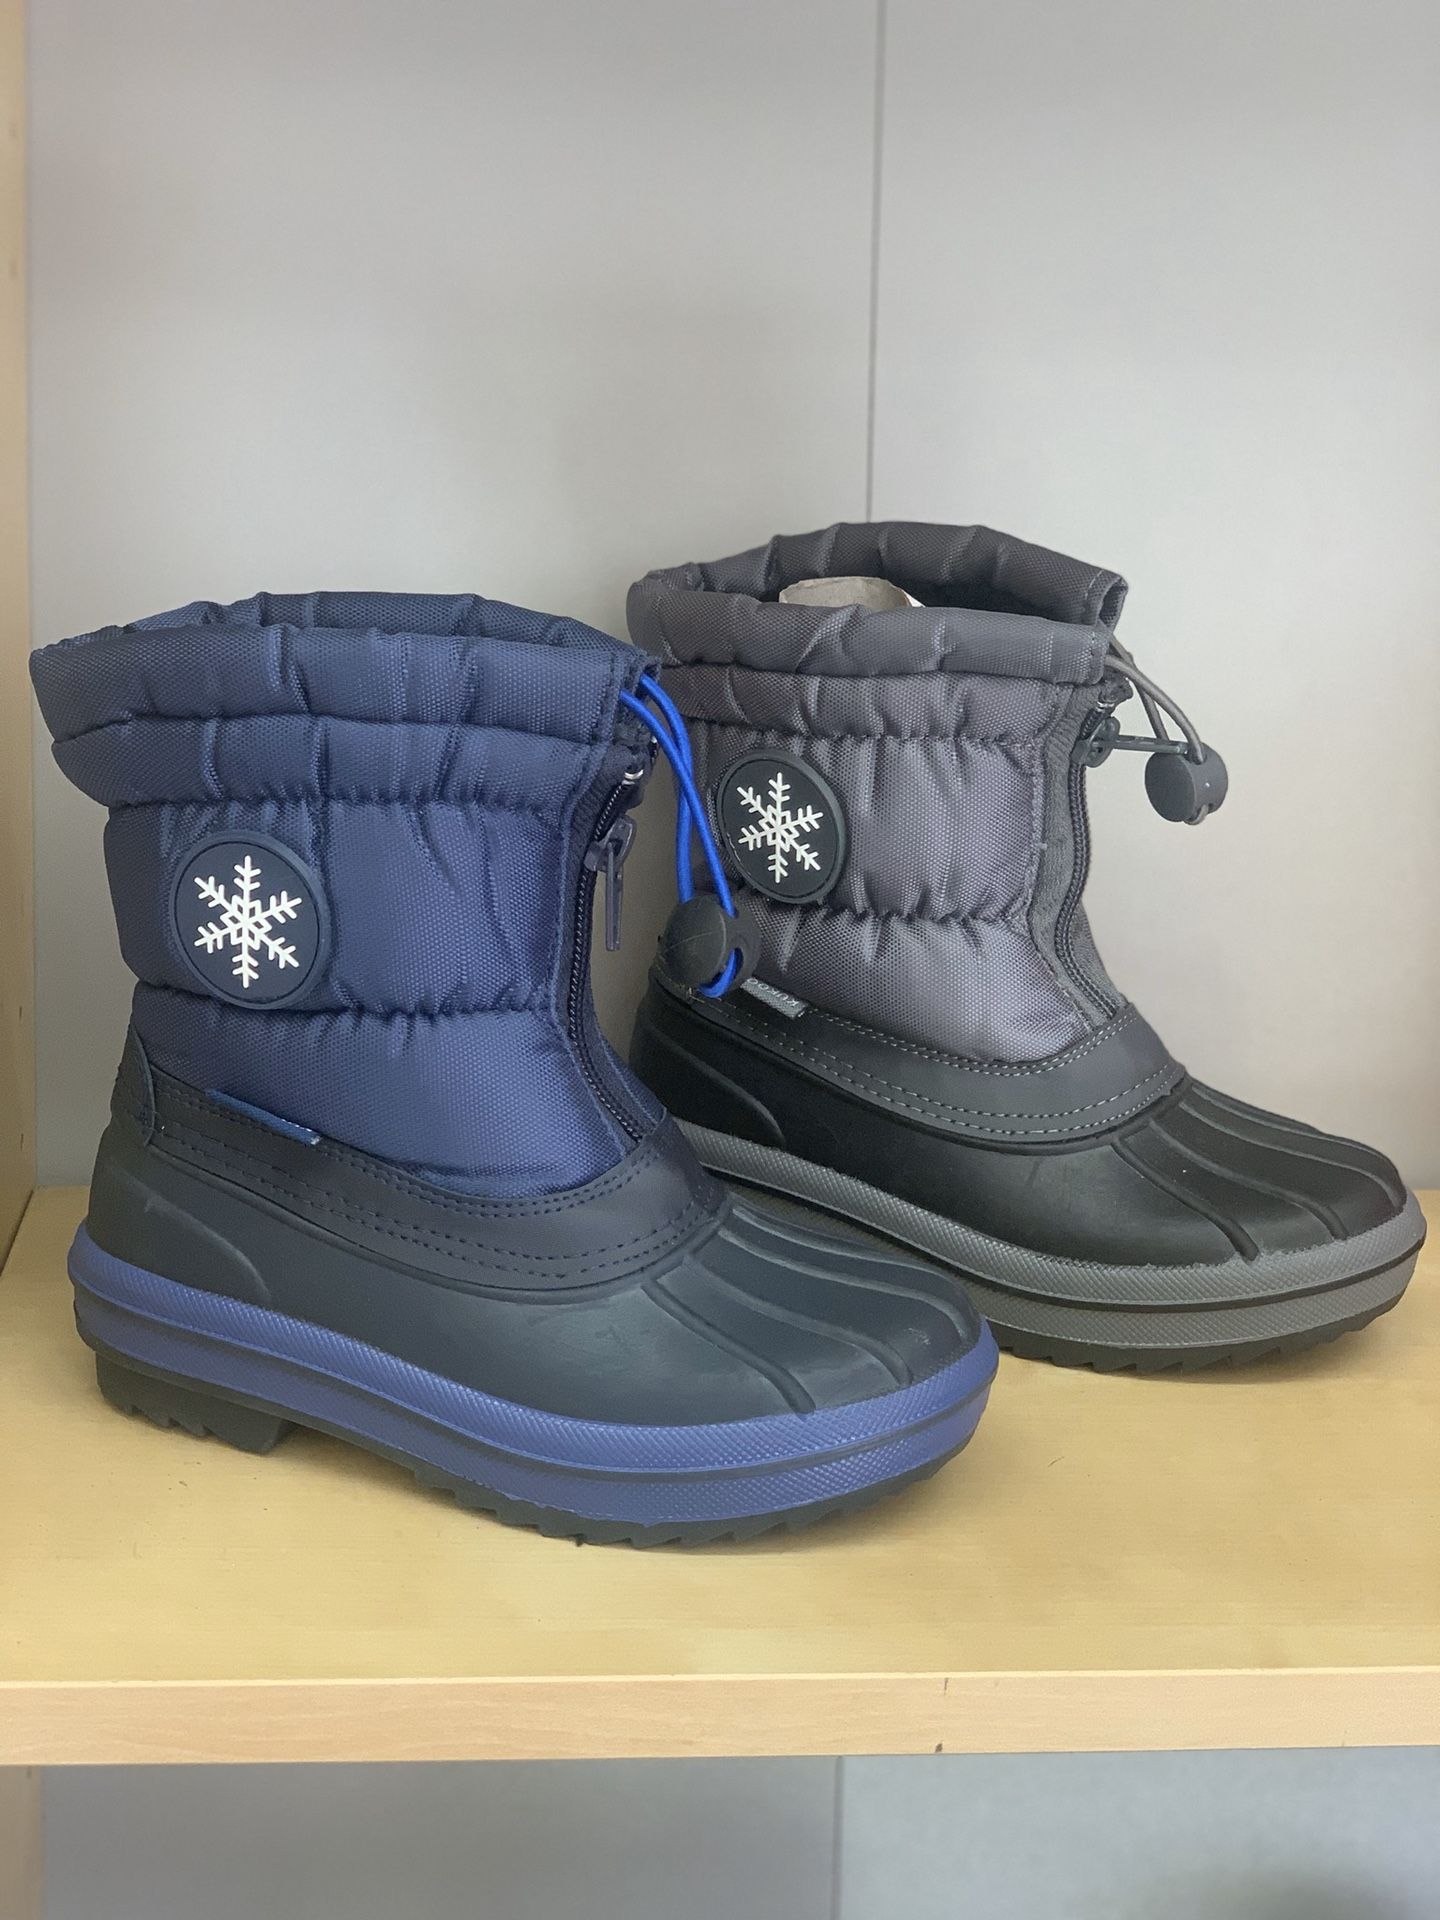 Snow boots for boys kids sizes 2, 3, 4